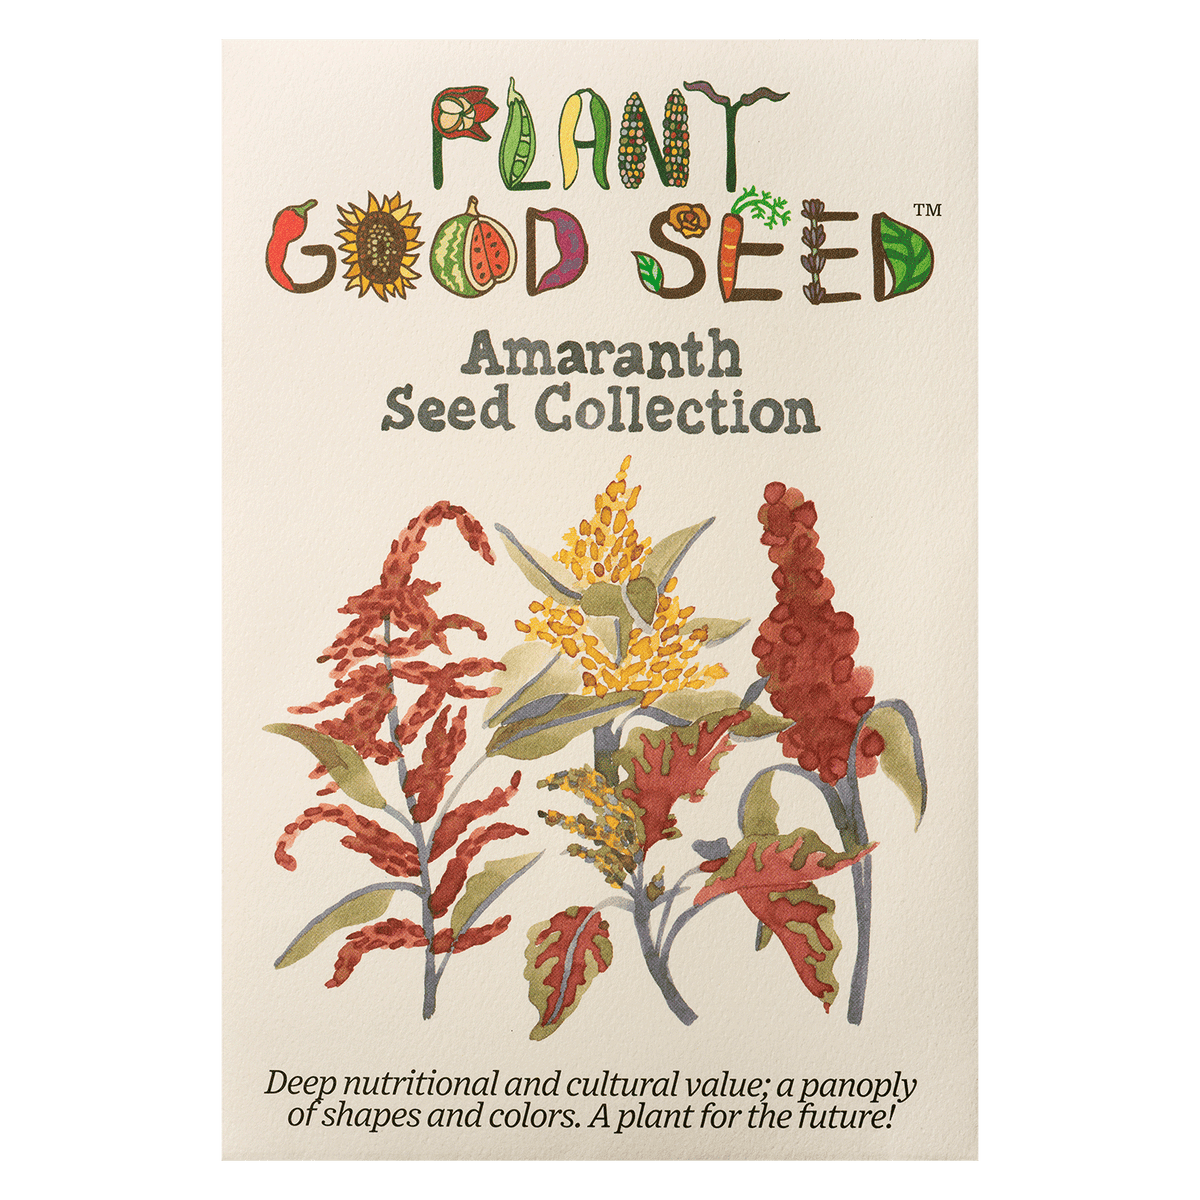 Amaranth Seed Collection